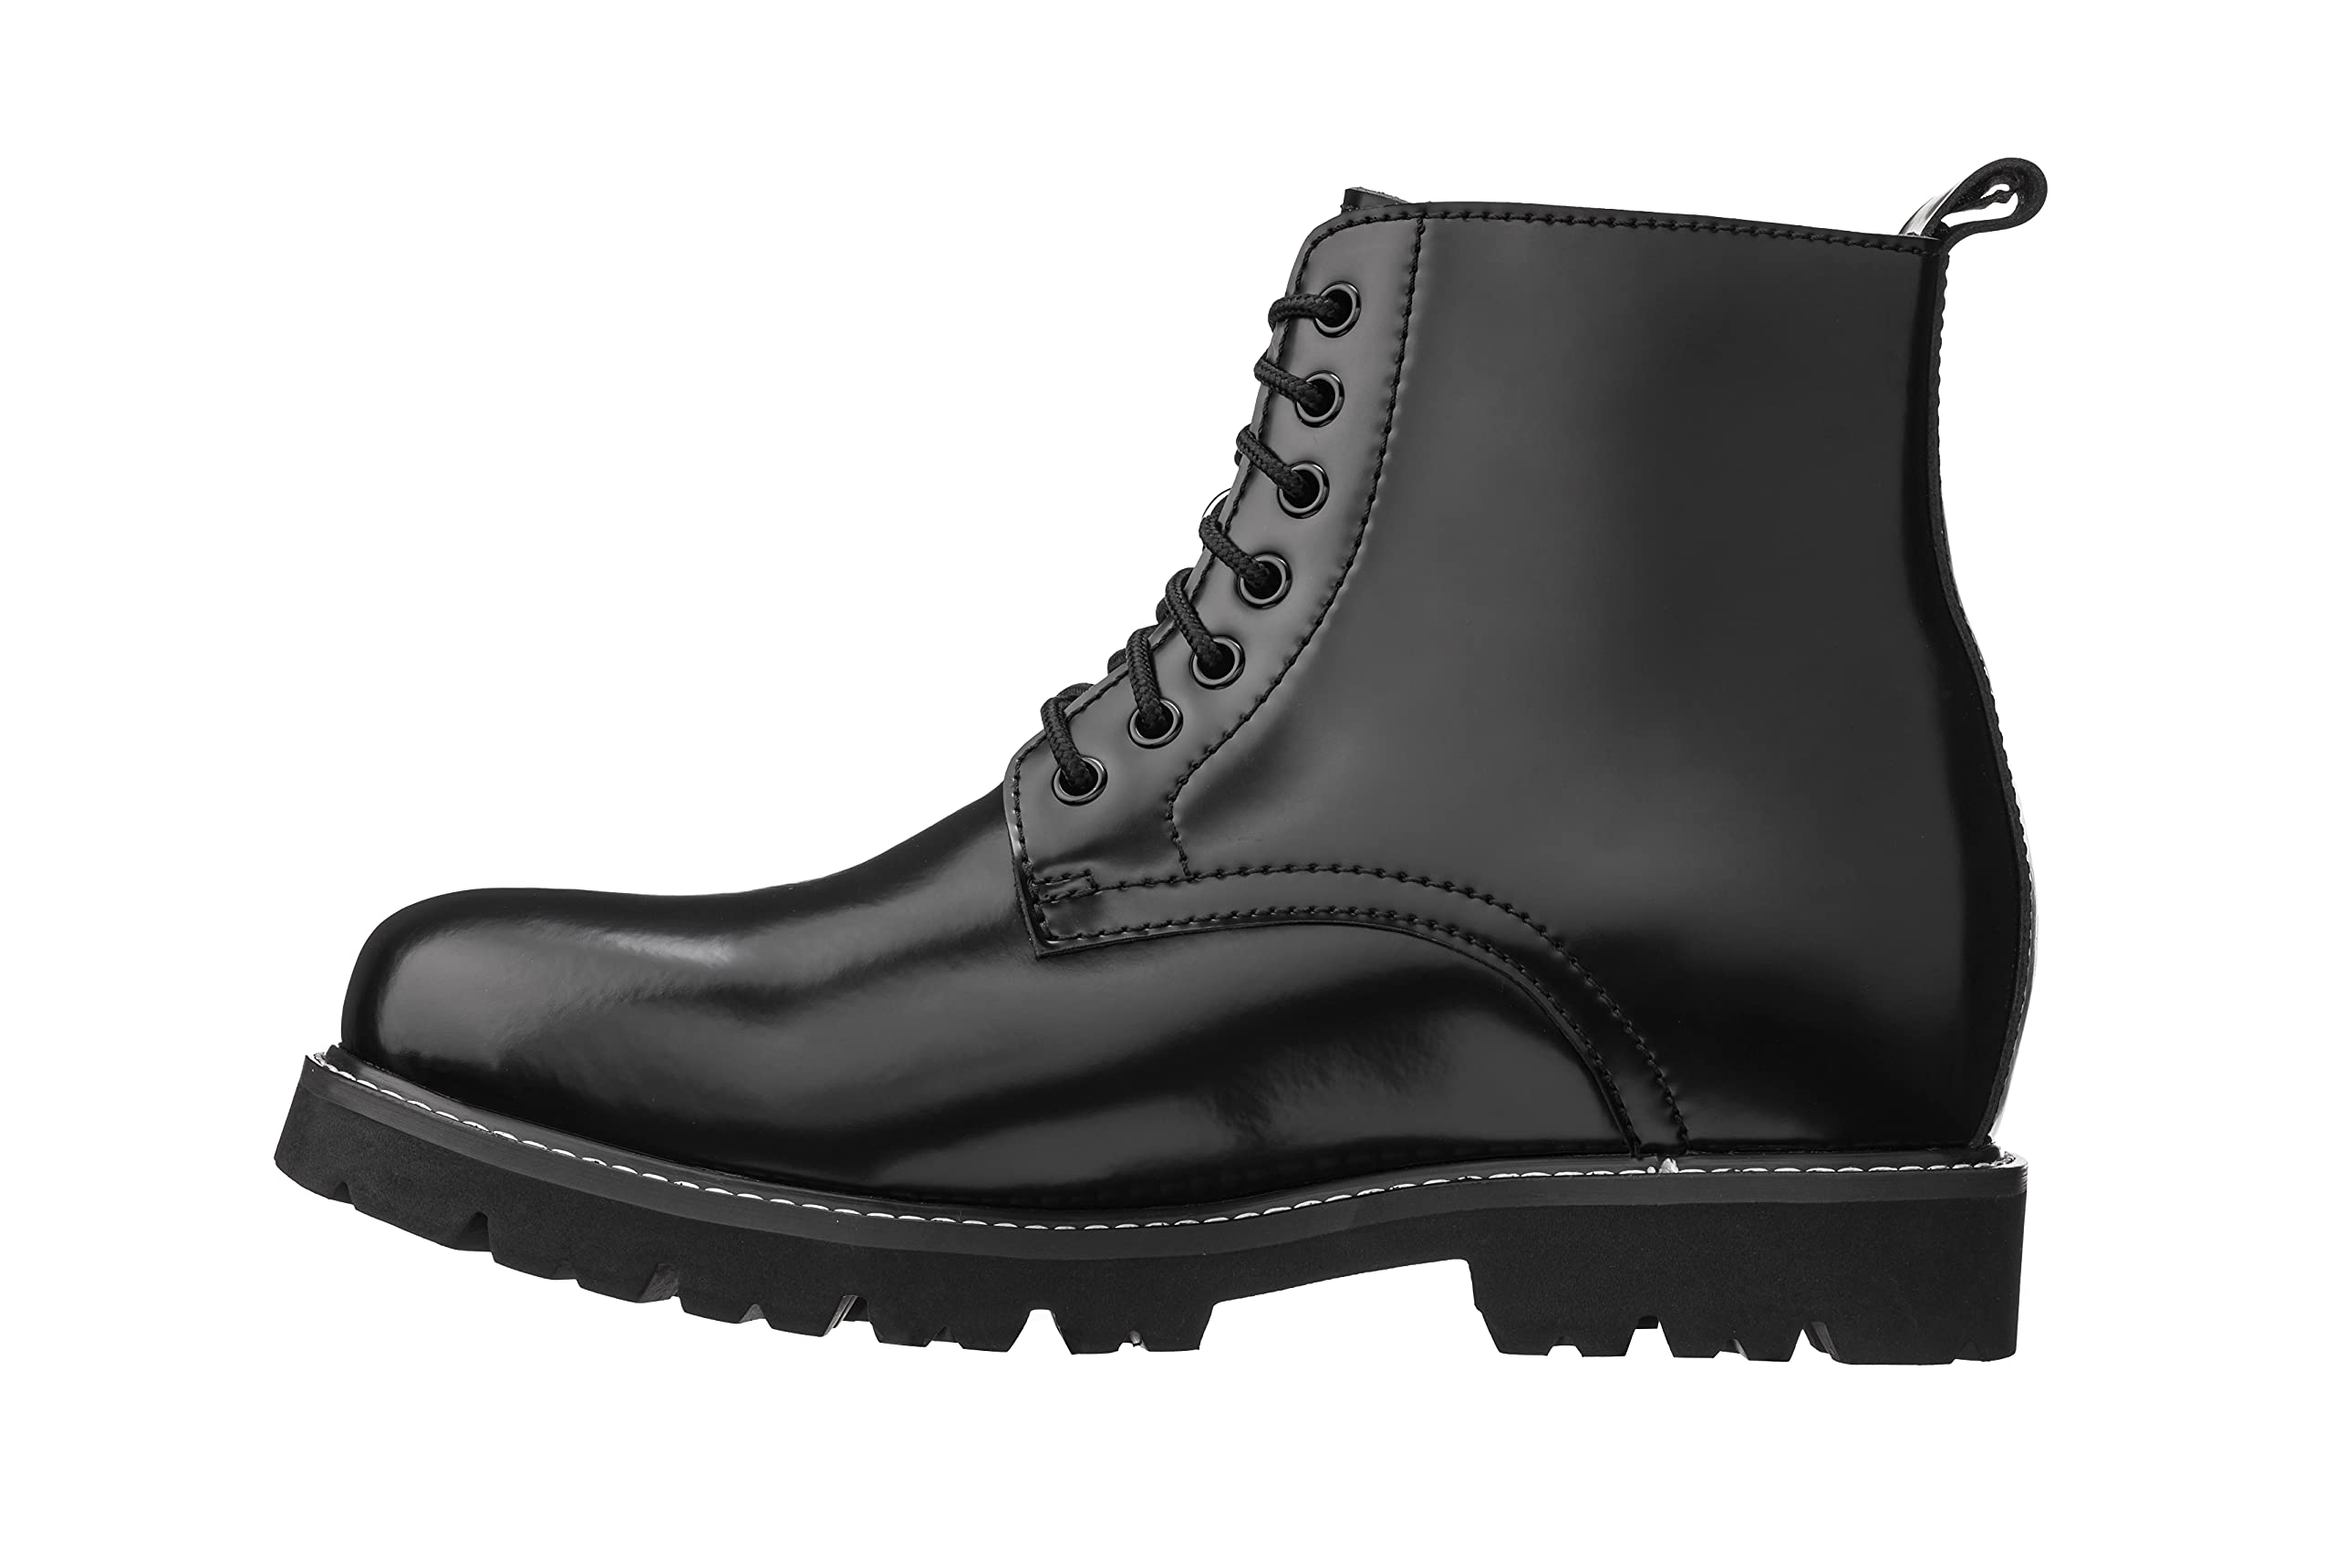 CALTO Men's Invisible Height Increasing Elevator Shoes - Leather Round-Toe Lace-up Work Boots - 3.3 Inches Taller